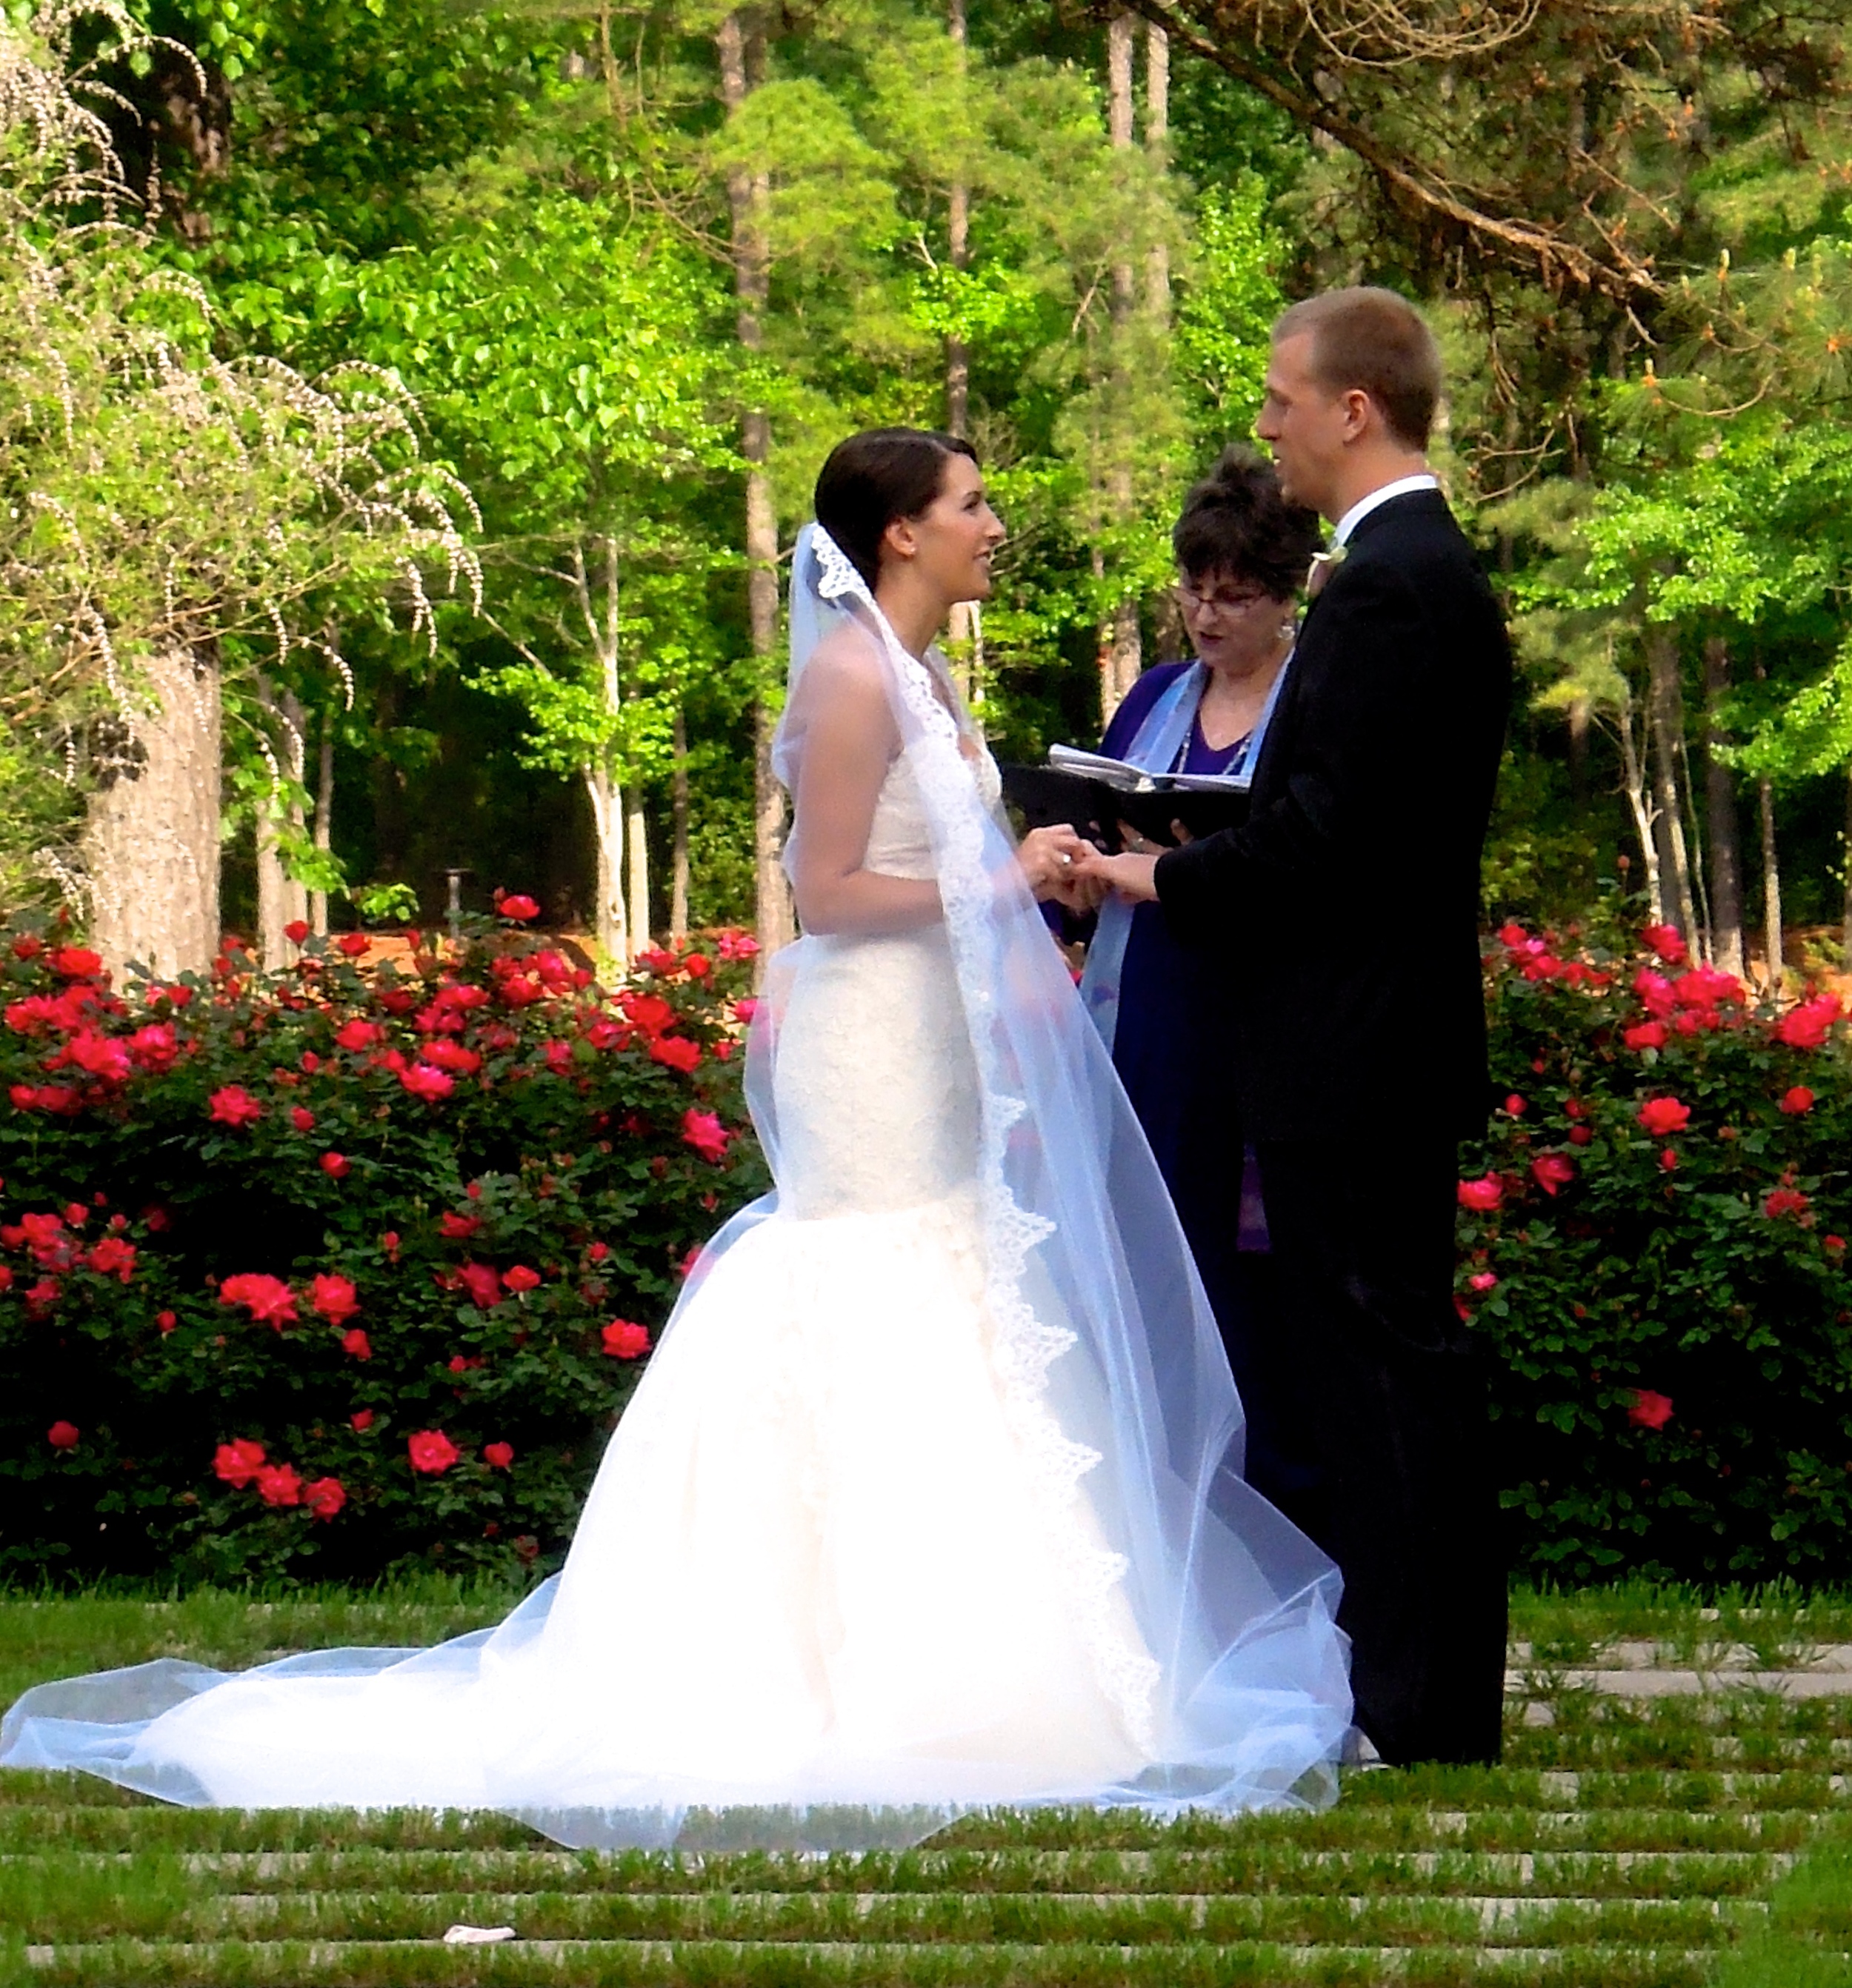 The Umstead Hotel and Spa Wedding in the Courtyard, Cary NC